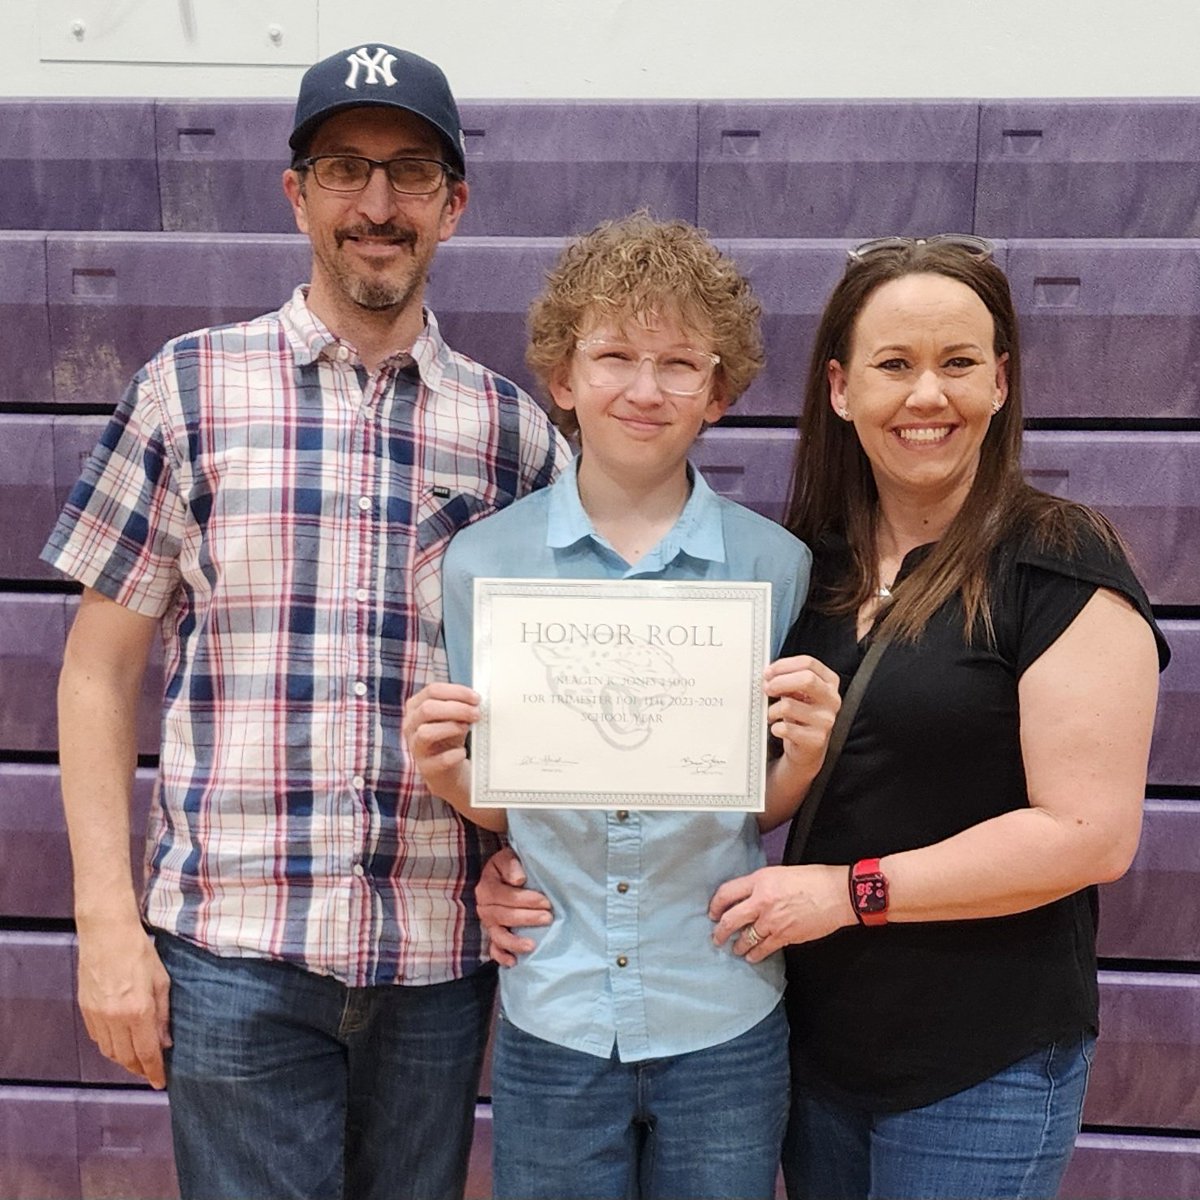 Keagen made the 8th grade 3.5 and above Honor Roll.

@cheechocheerio Congratulations Dude! Me and mom are proud of you!!

#ProudDadMoment #HonorRoll